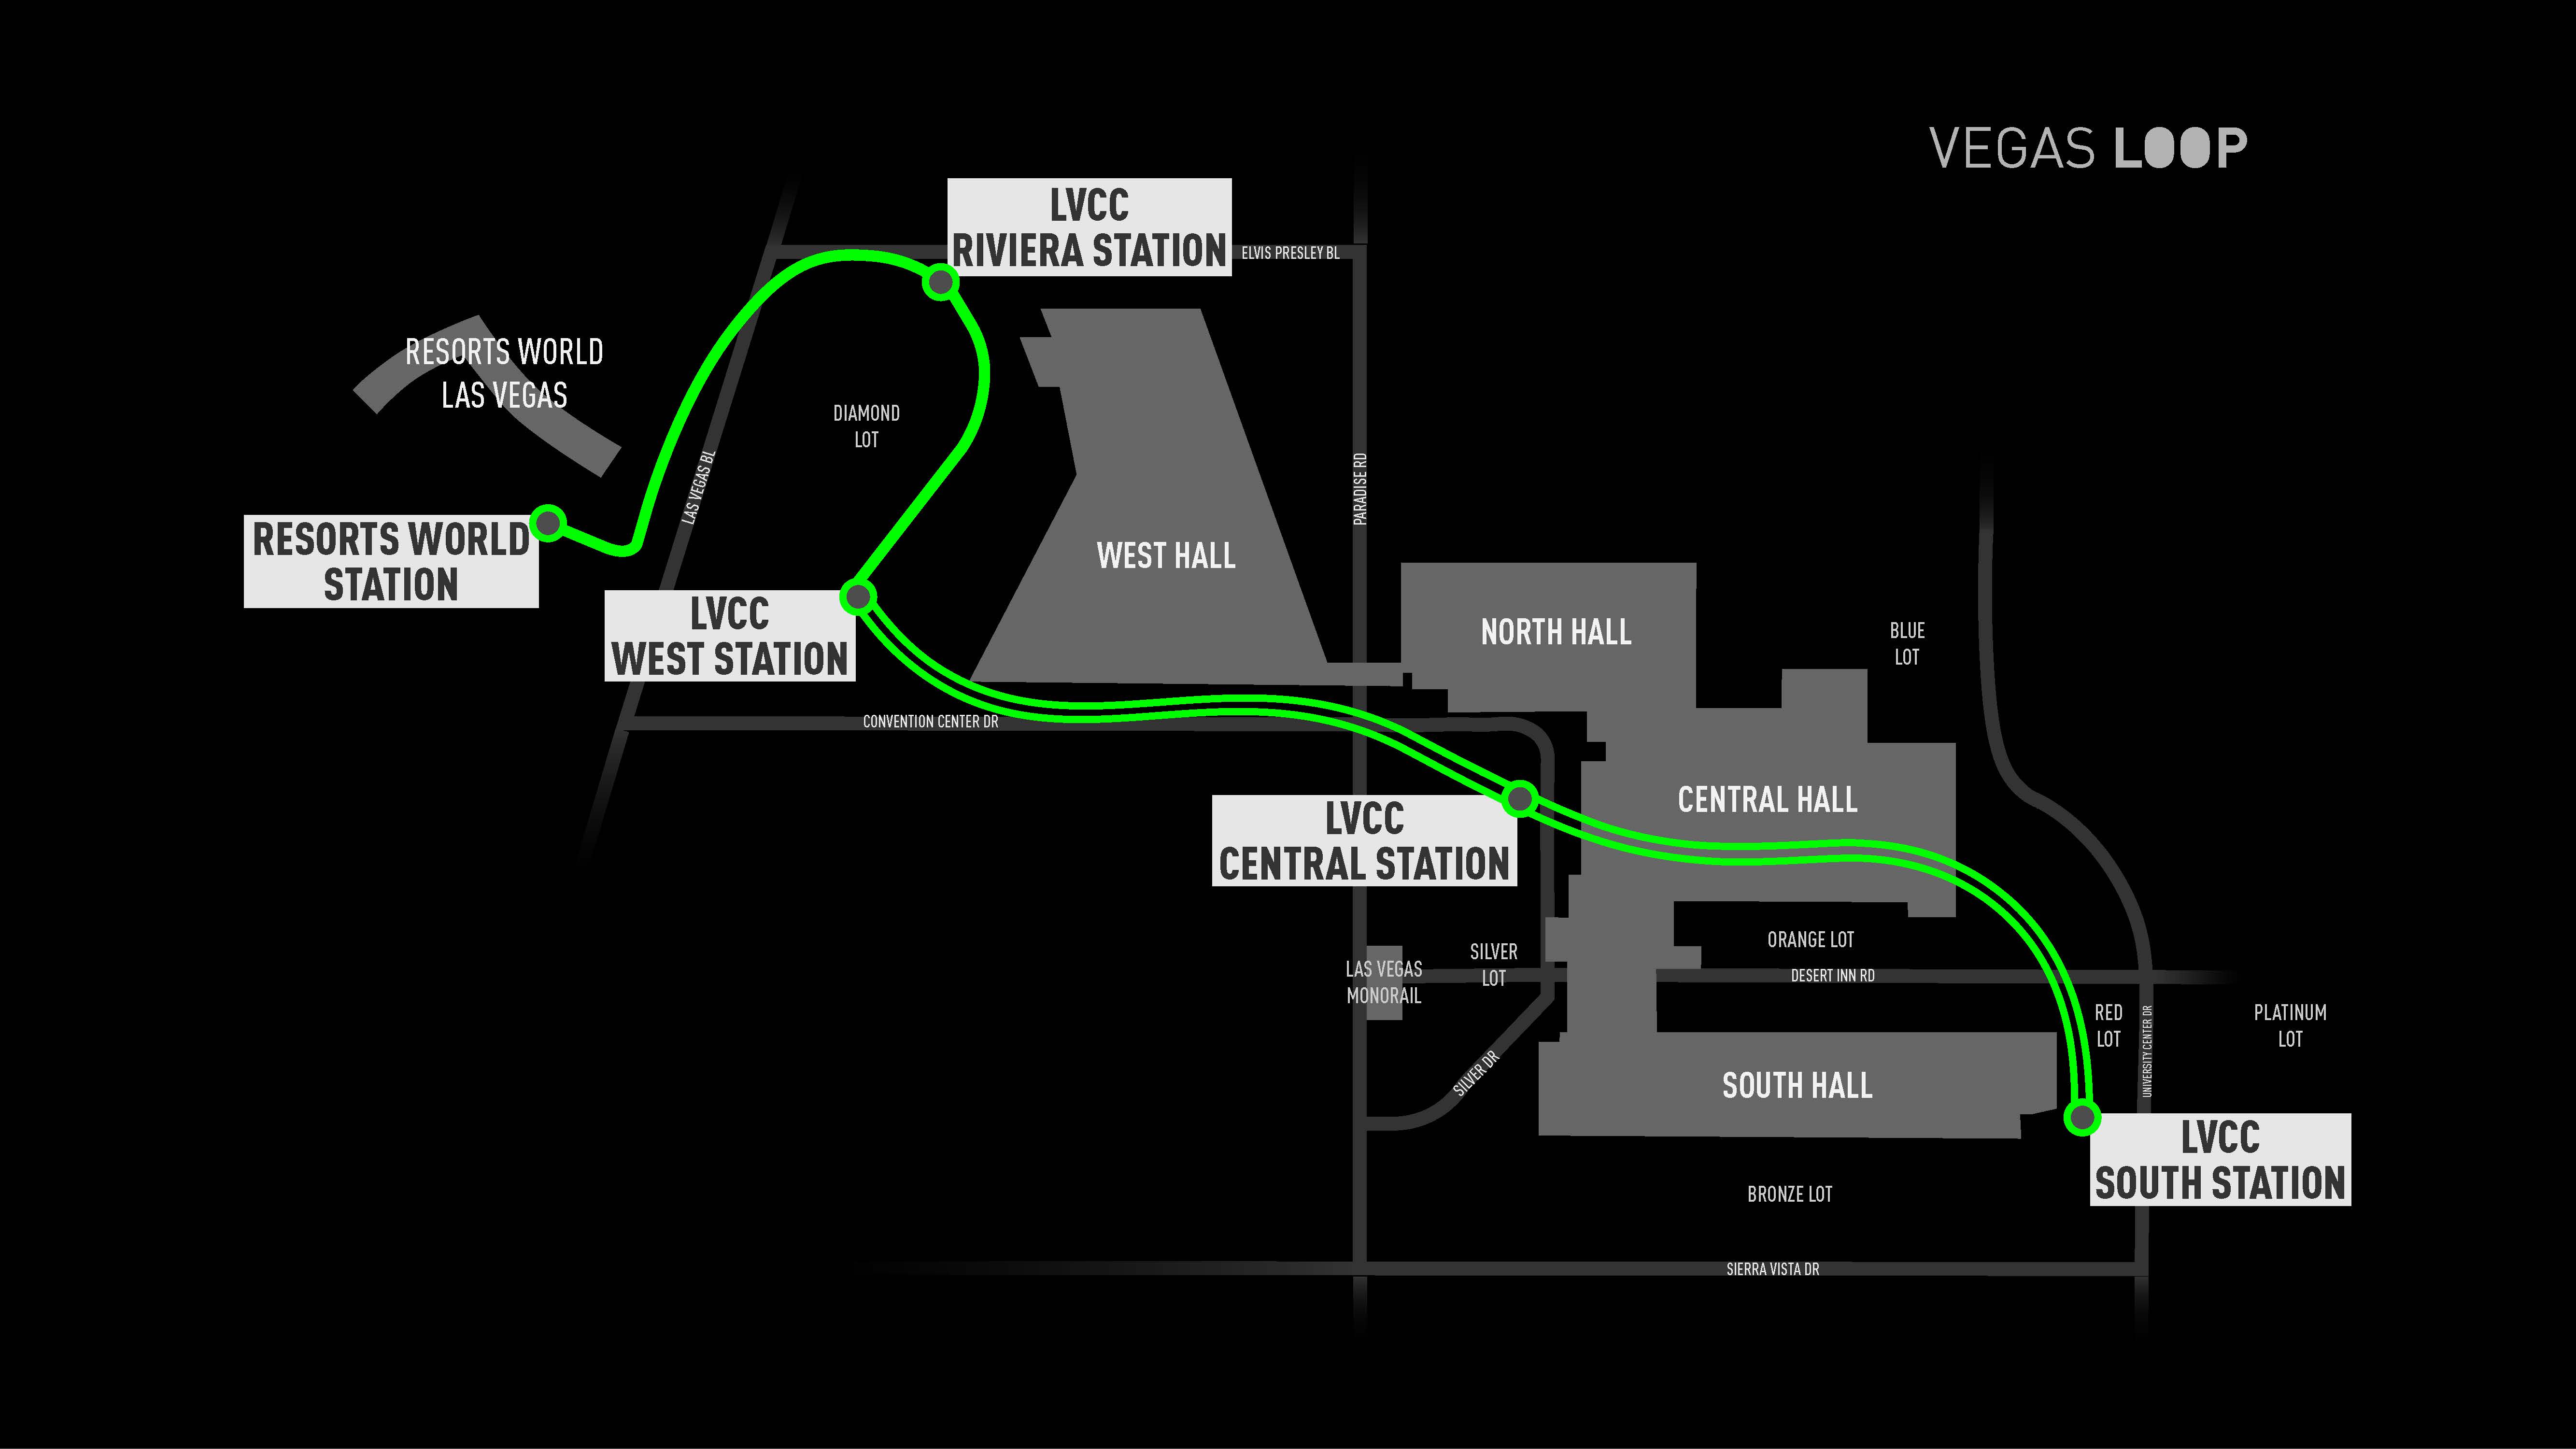 Vegas Loop Guide - How It Works, The Experience & FAQs